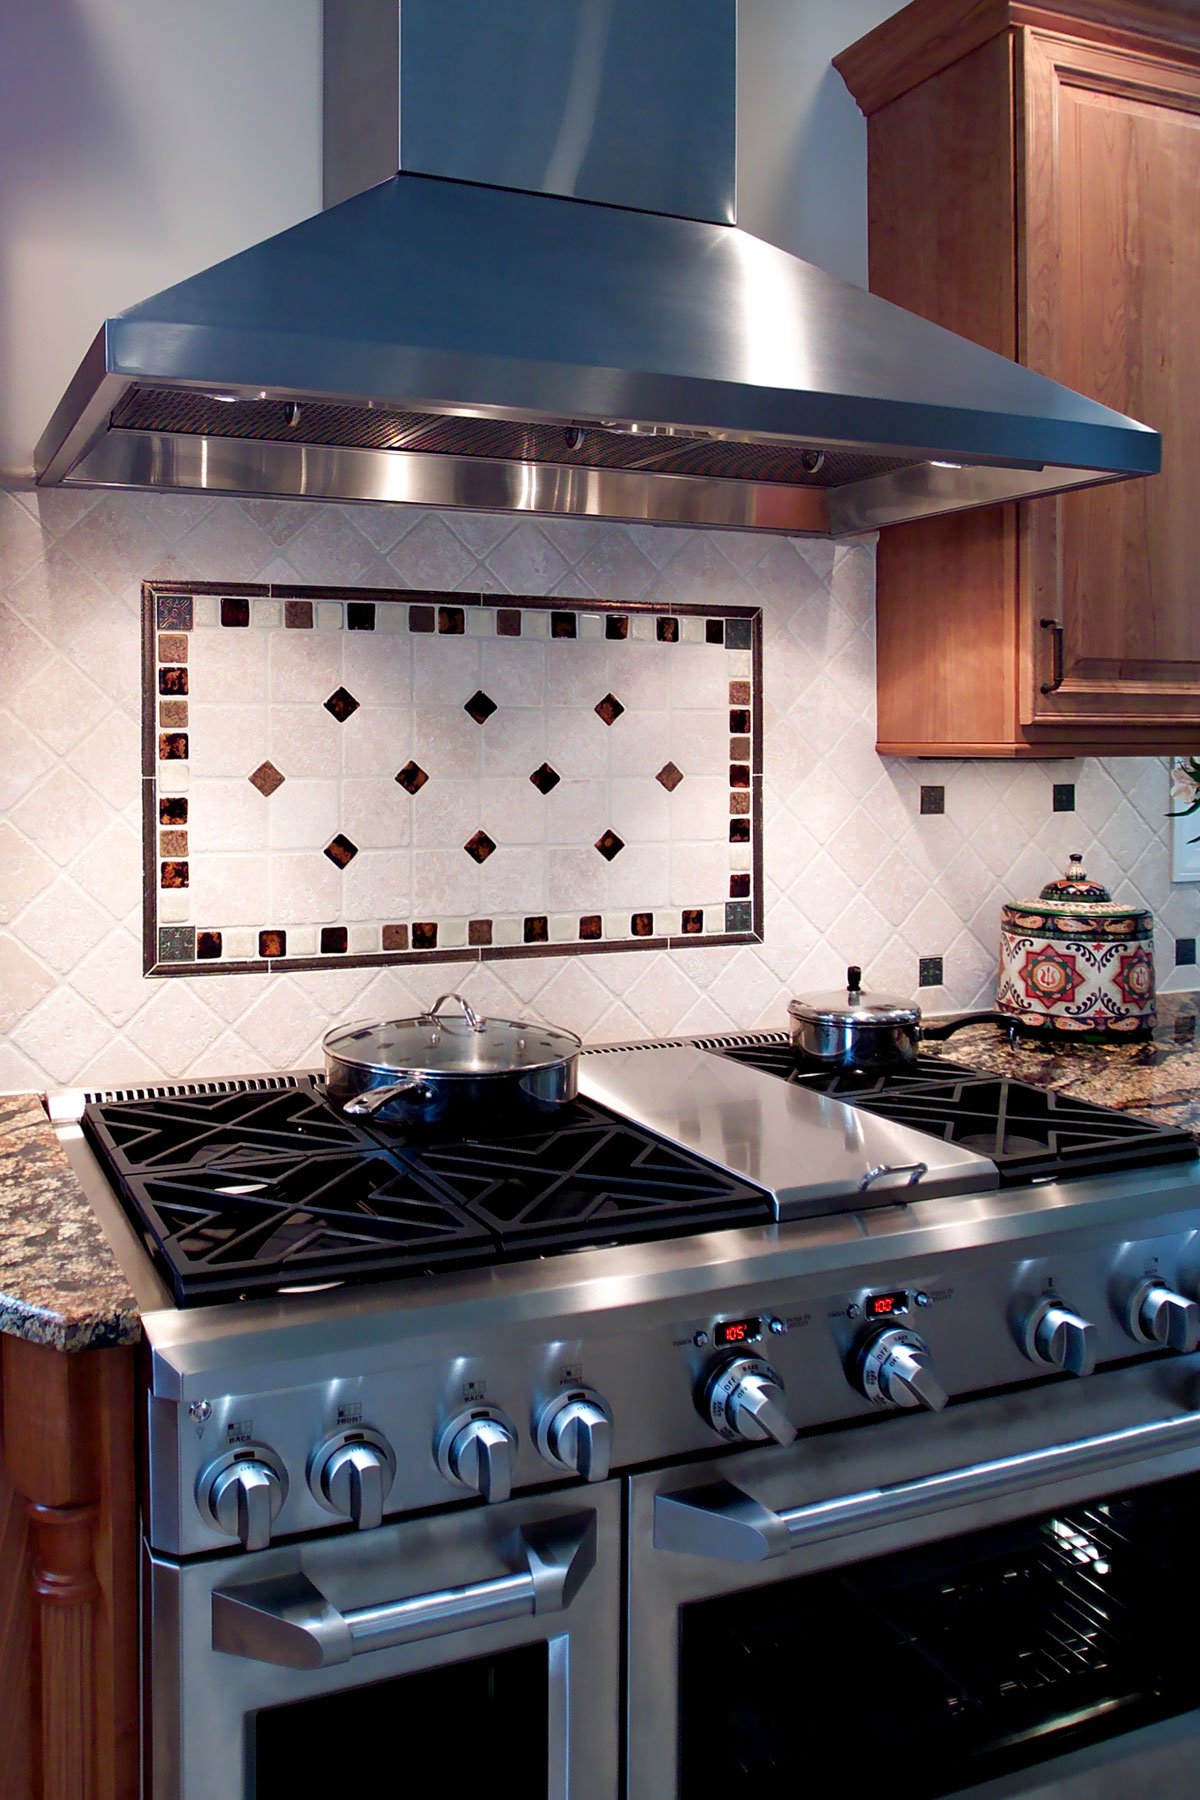 Stainless steel oven with stainless steel exhaust hood and geometric tile backsplash pattern